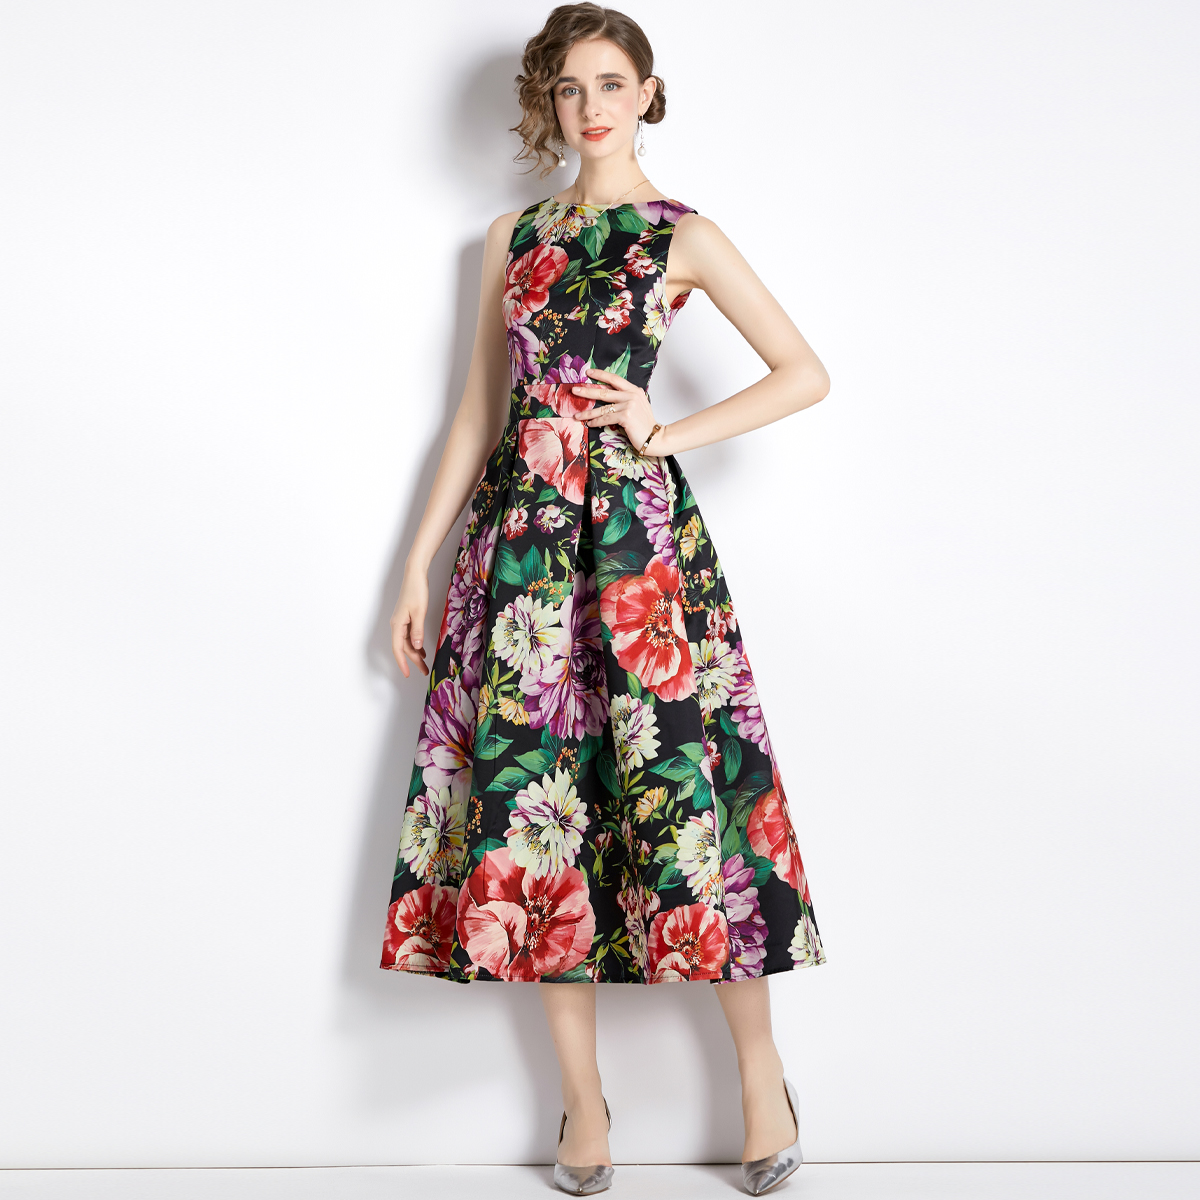 Sleeveless clipping stereoscopic pinched waist dress